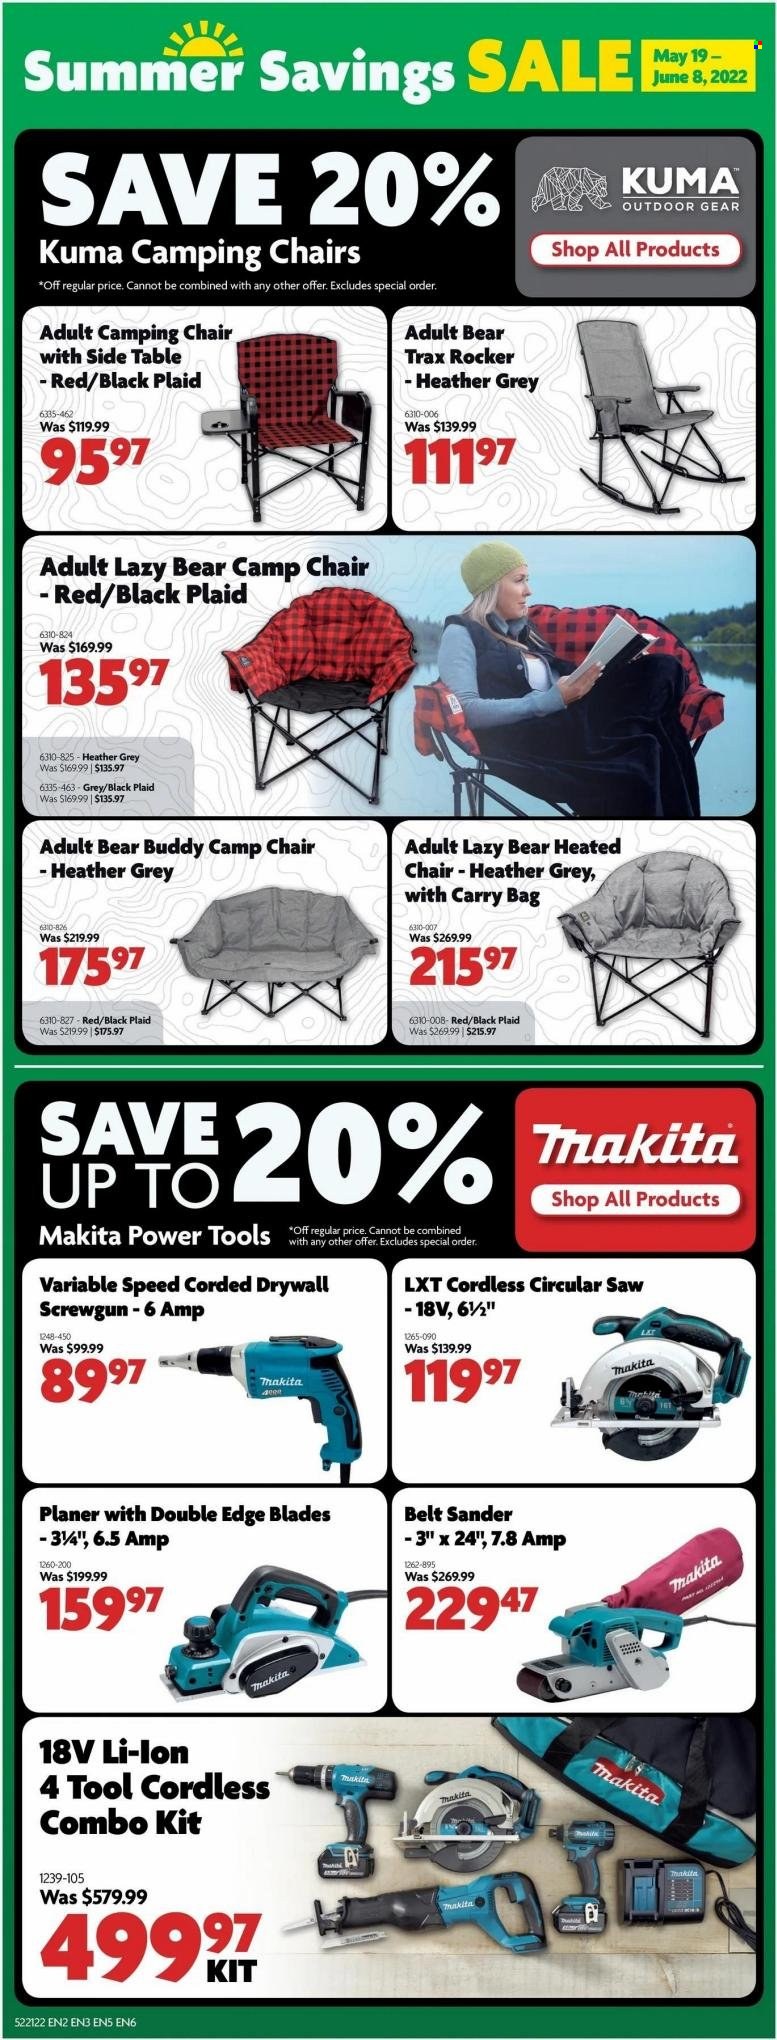 Home Hardware Building Centre flyer  - May 26, 2022 - June 01, 2022.